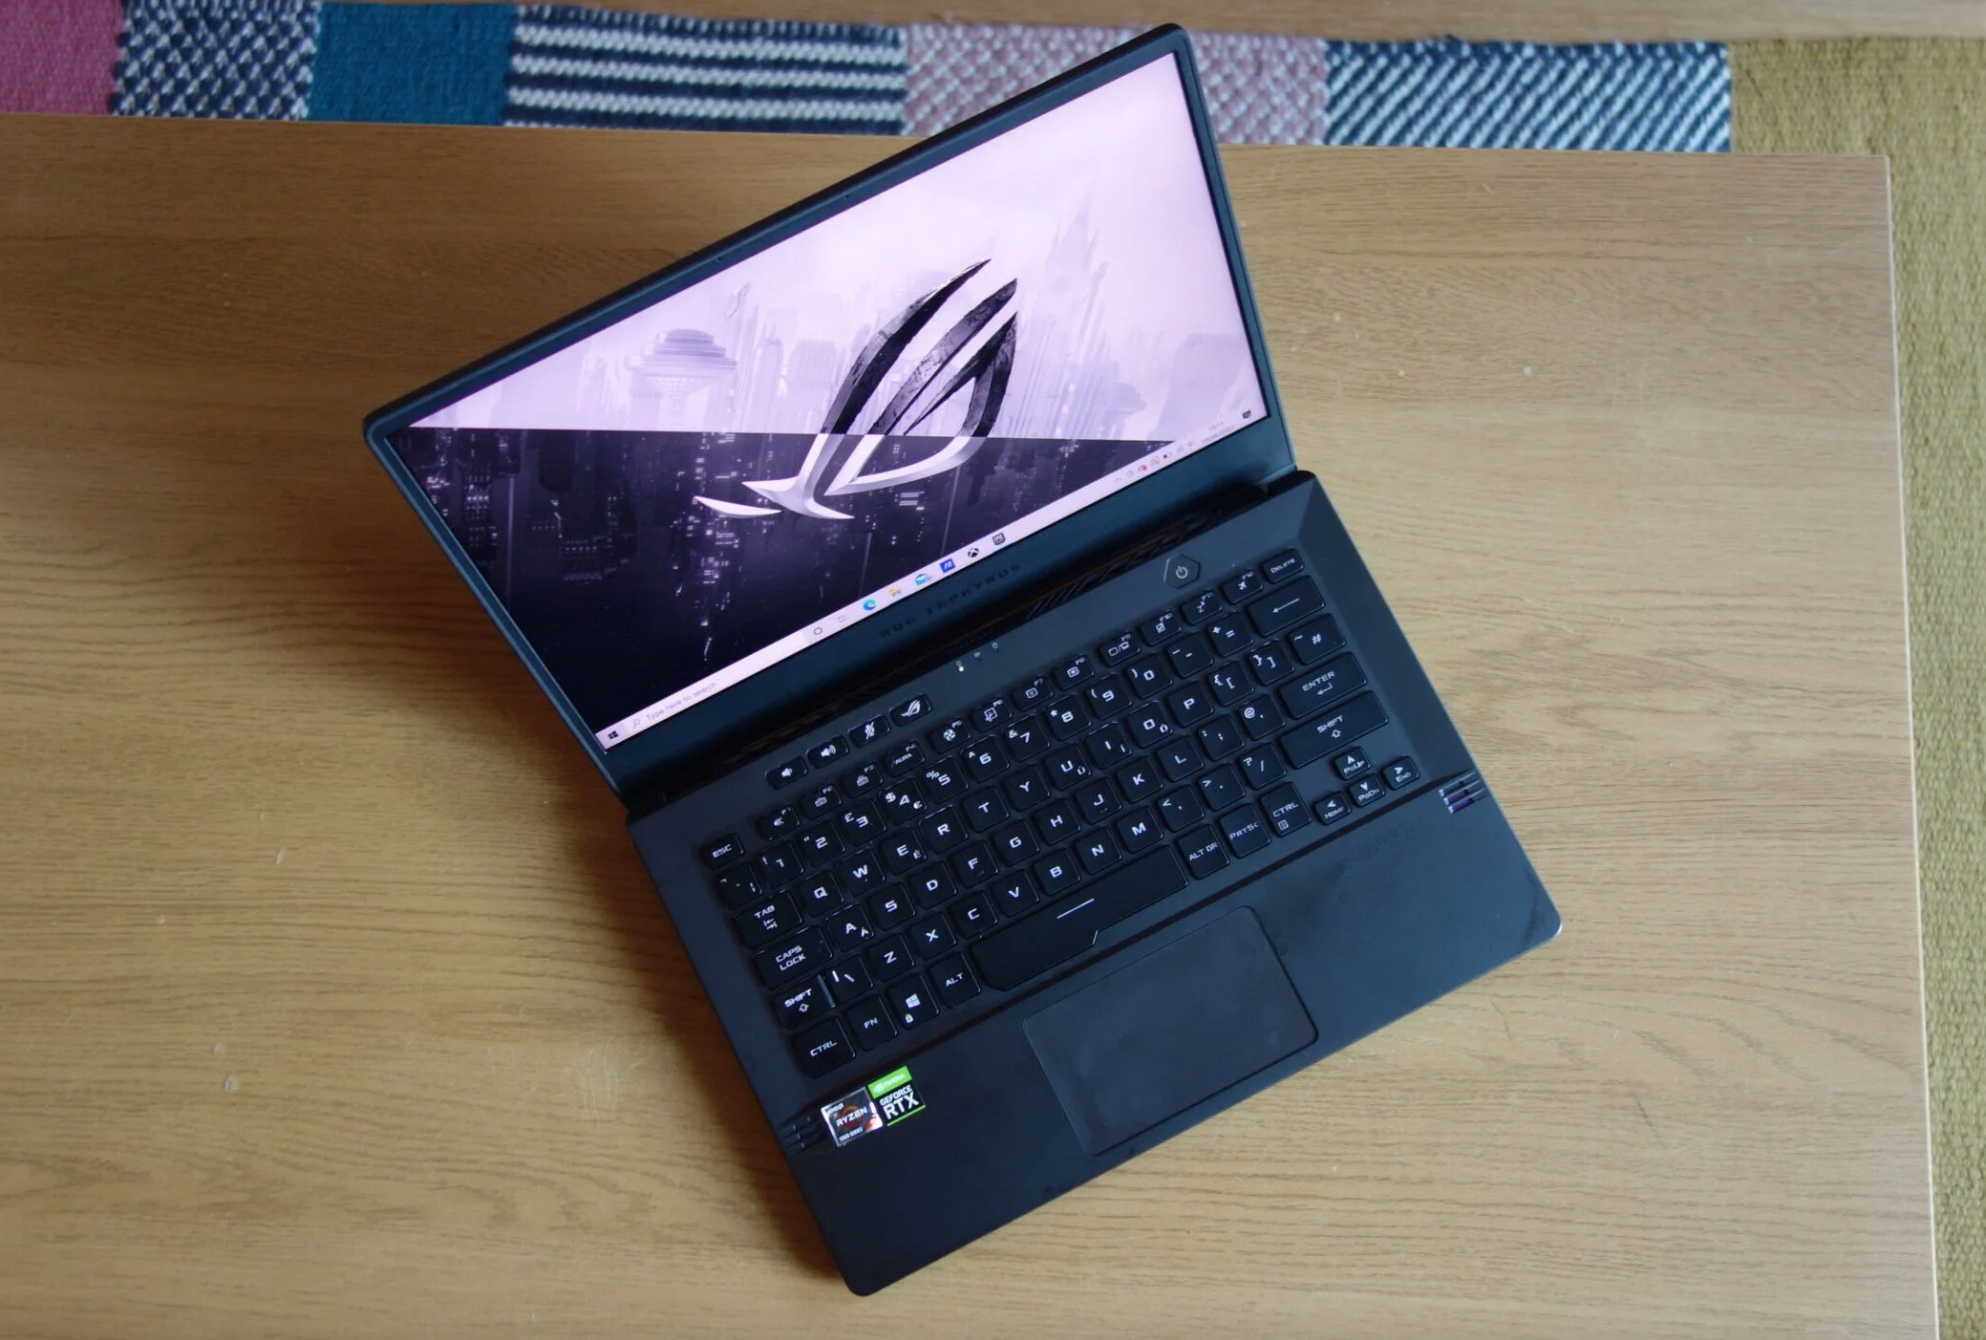 Why Asus laptops are cheap? A Detailed Guide